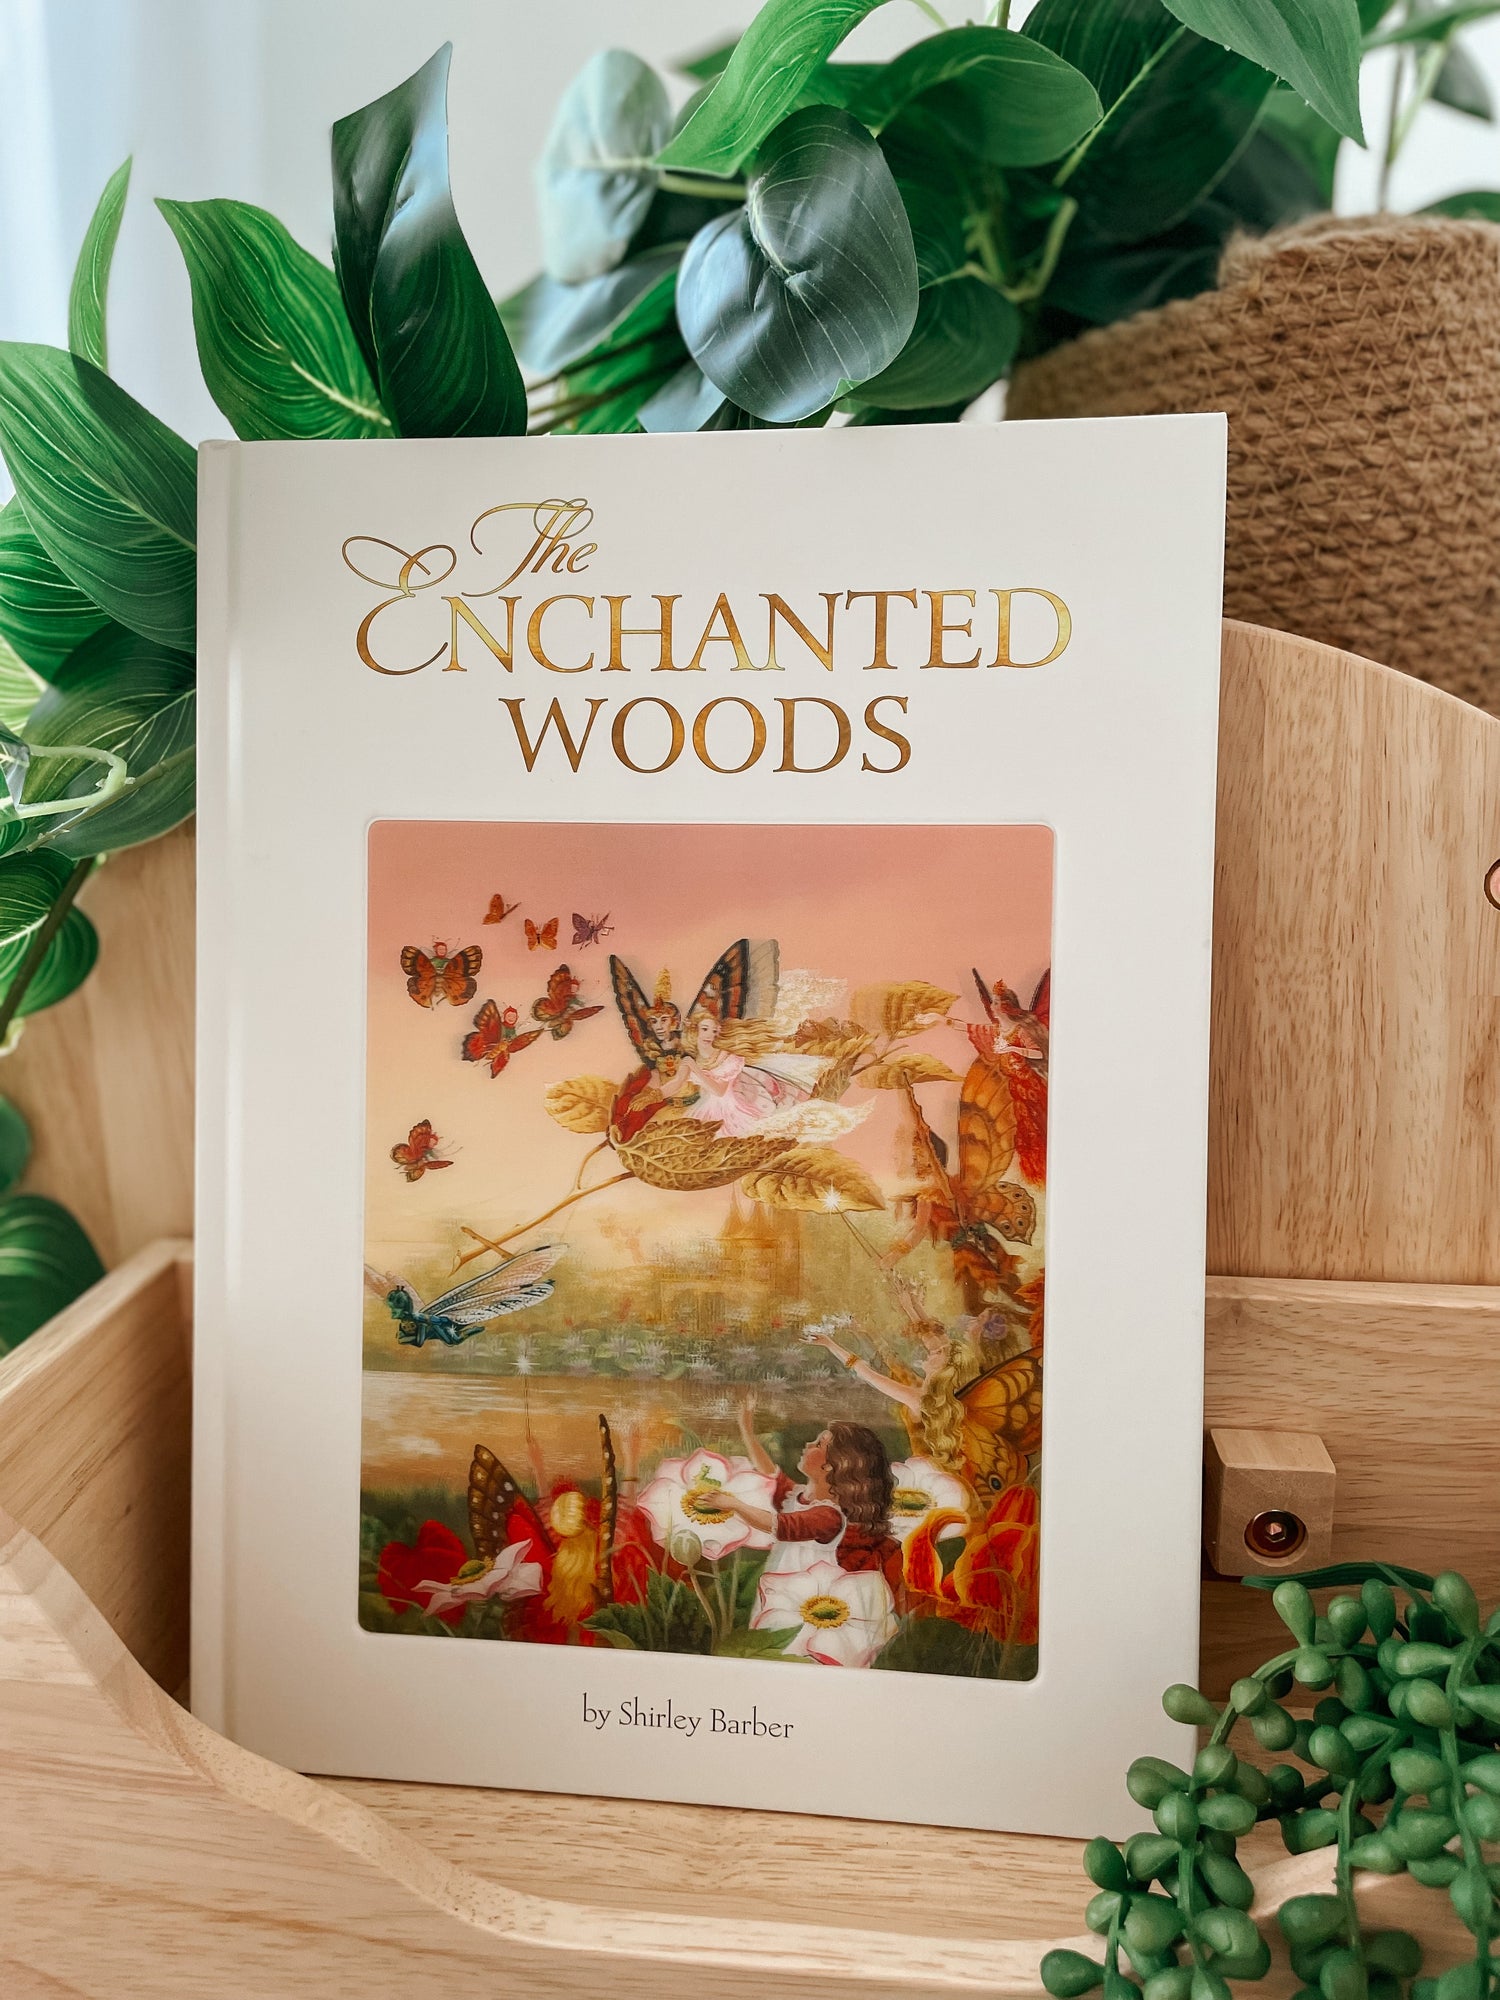 SHIRLEY BARBER | THE ENCHANTED WOODS (LENTICULAR HARDBACK) by SHIRLEY BARBER - The Playful Collective